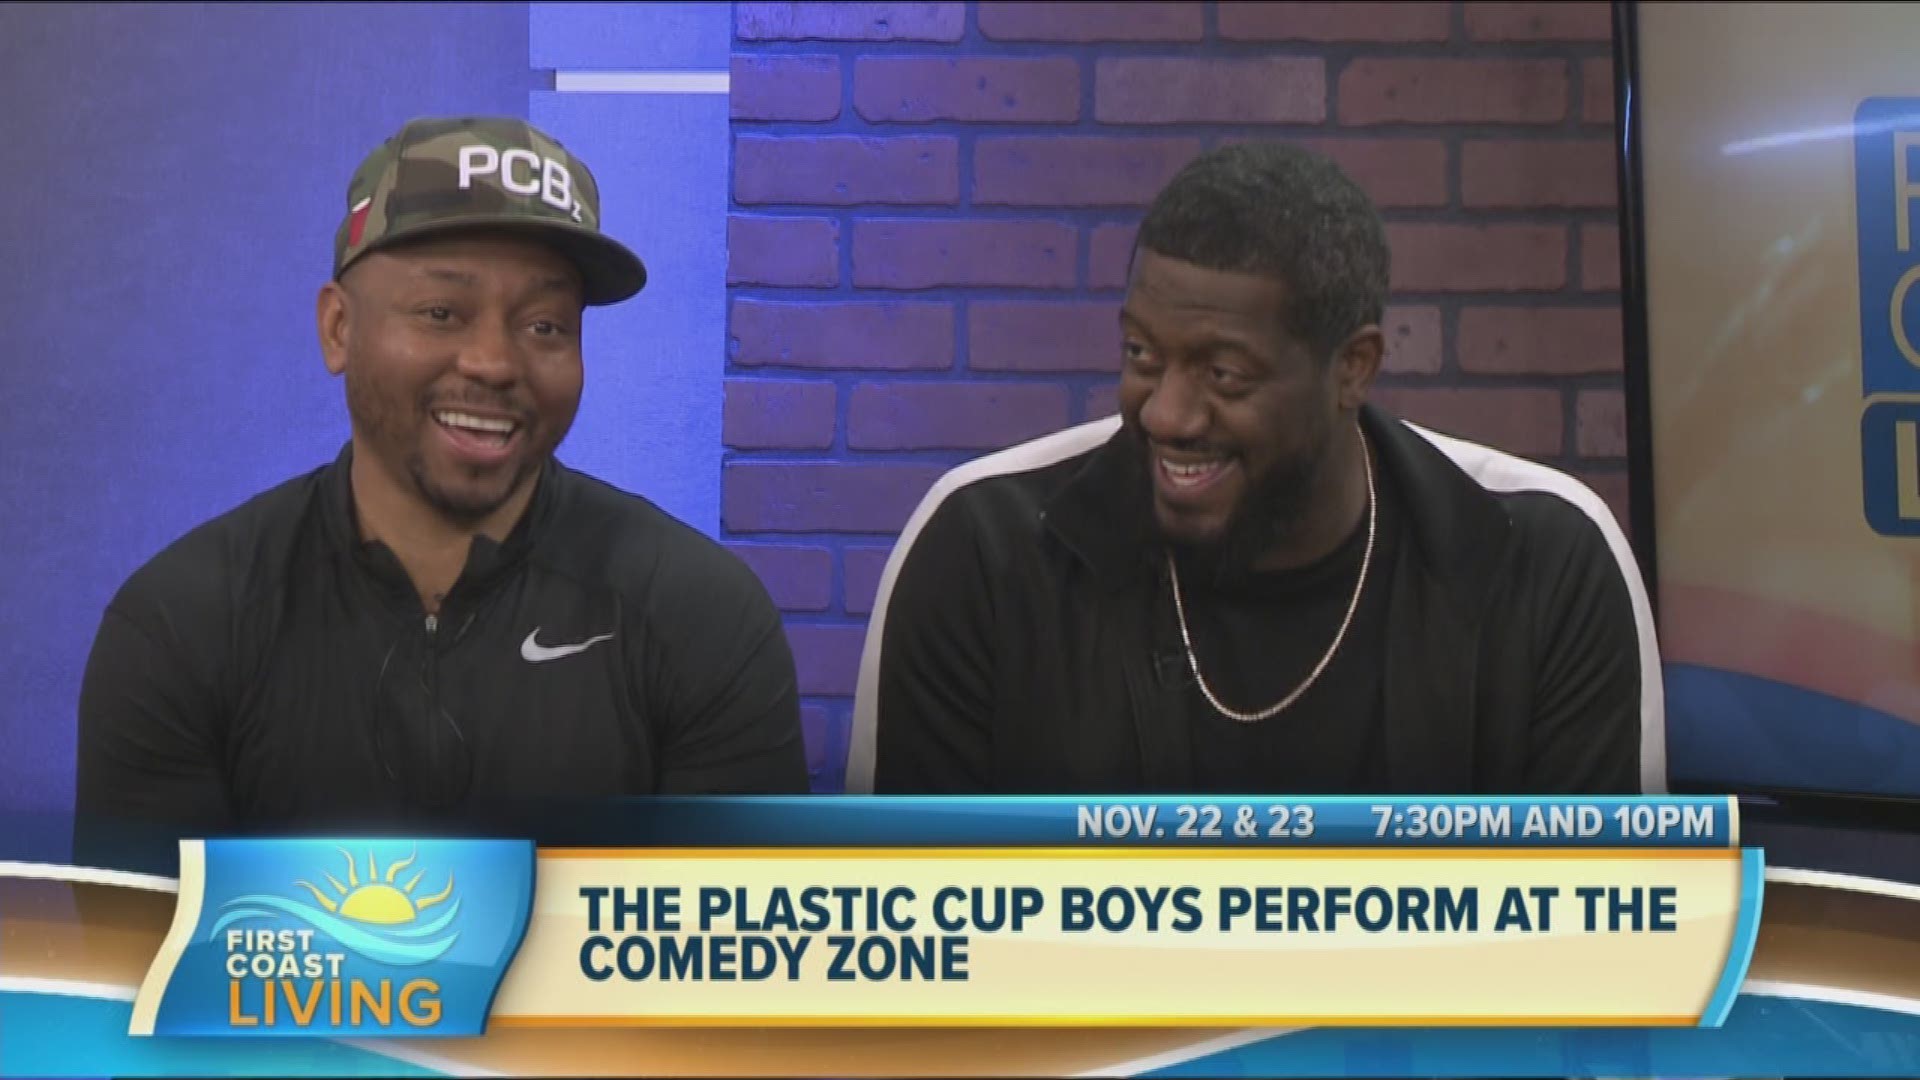 Get ready for two times the laughs with The Plastic Cup Boys!